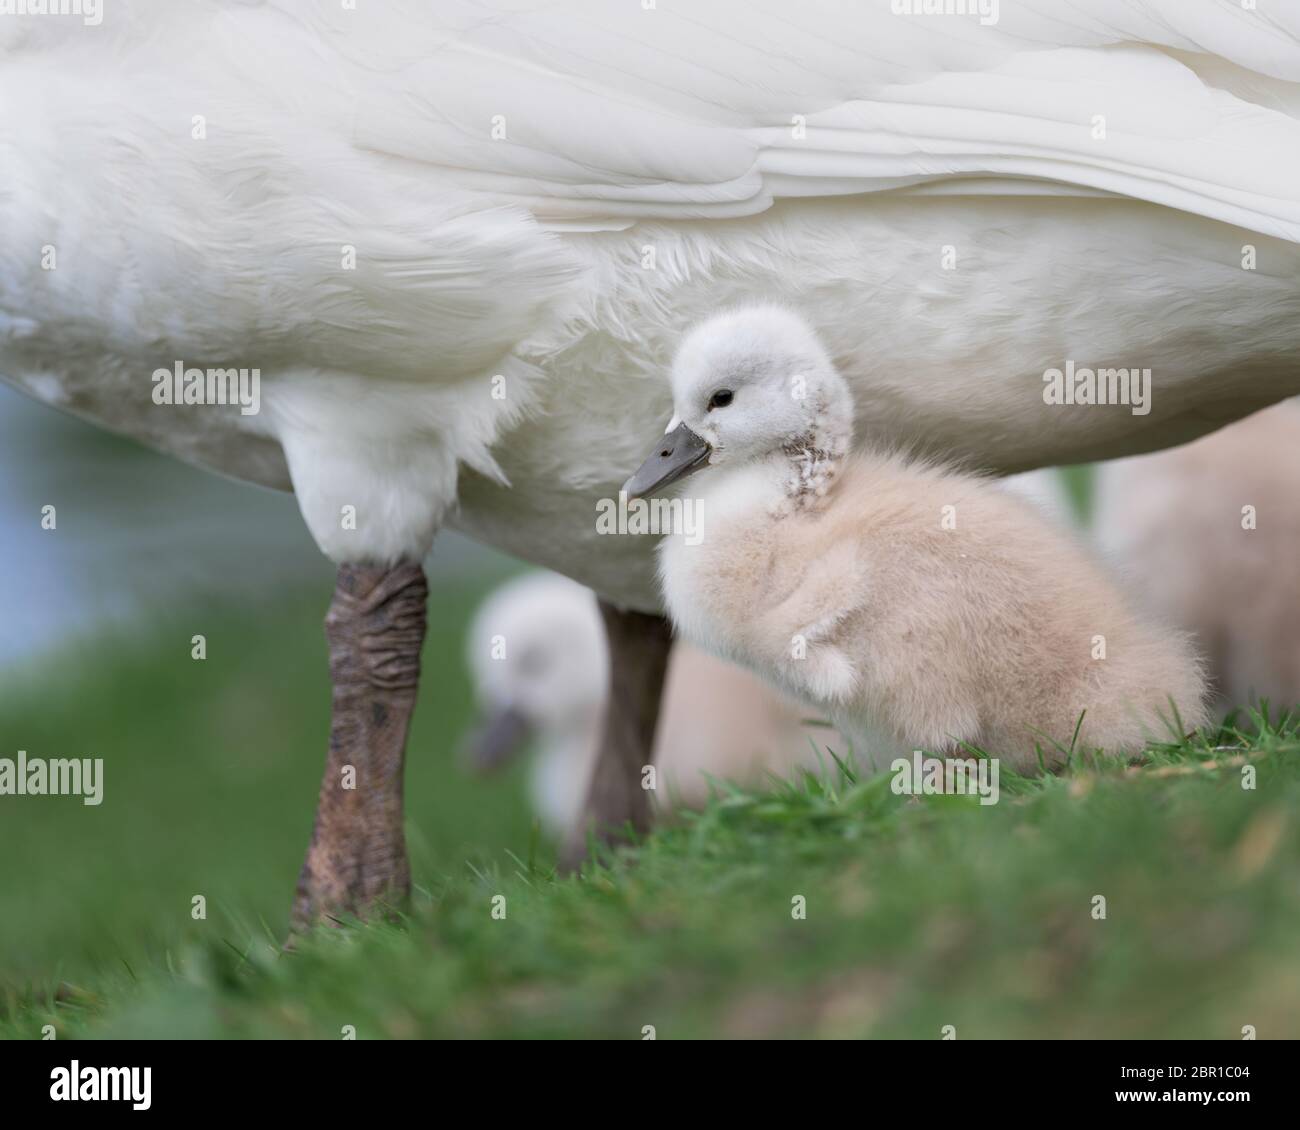 Newborn baby swan, or cygnet, under the protection of the mother swan (pen) Stock Photo